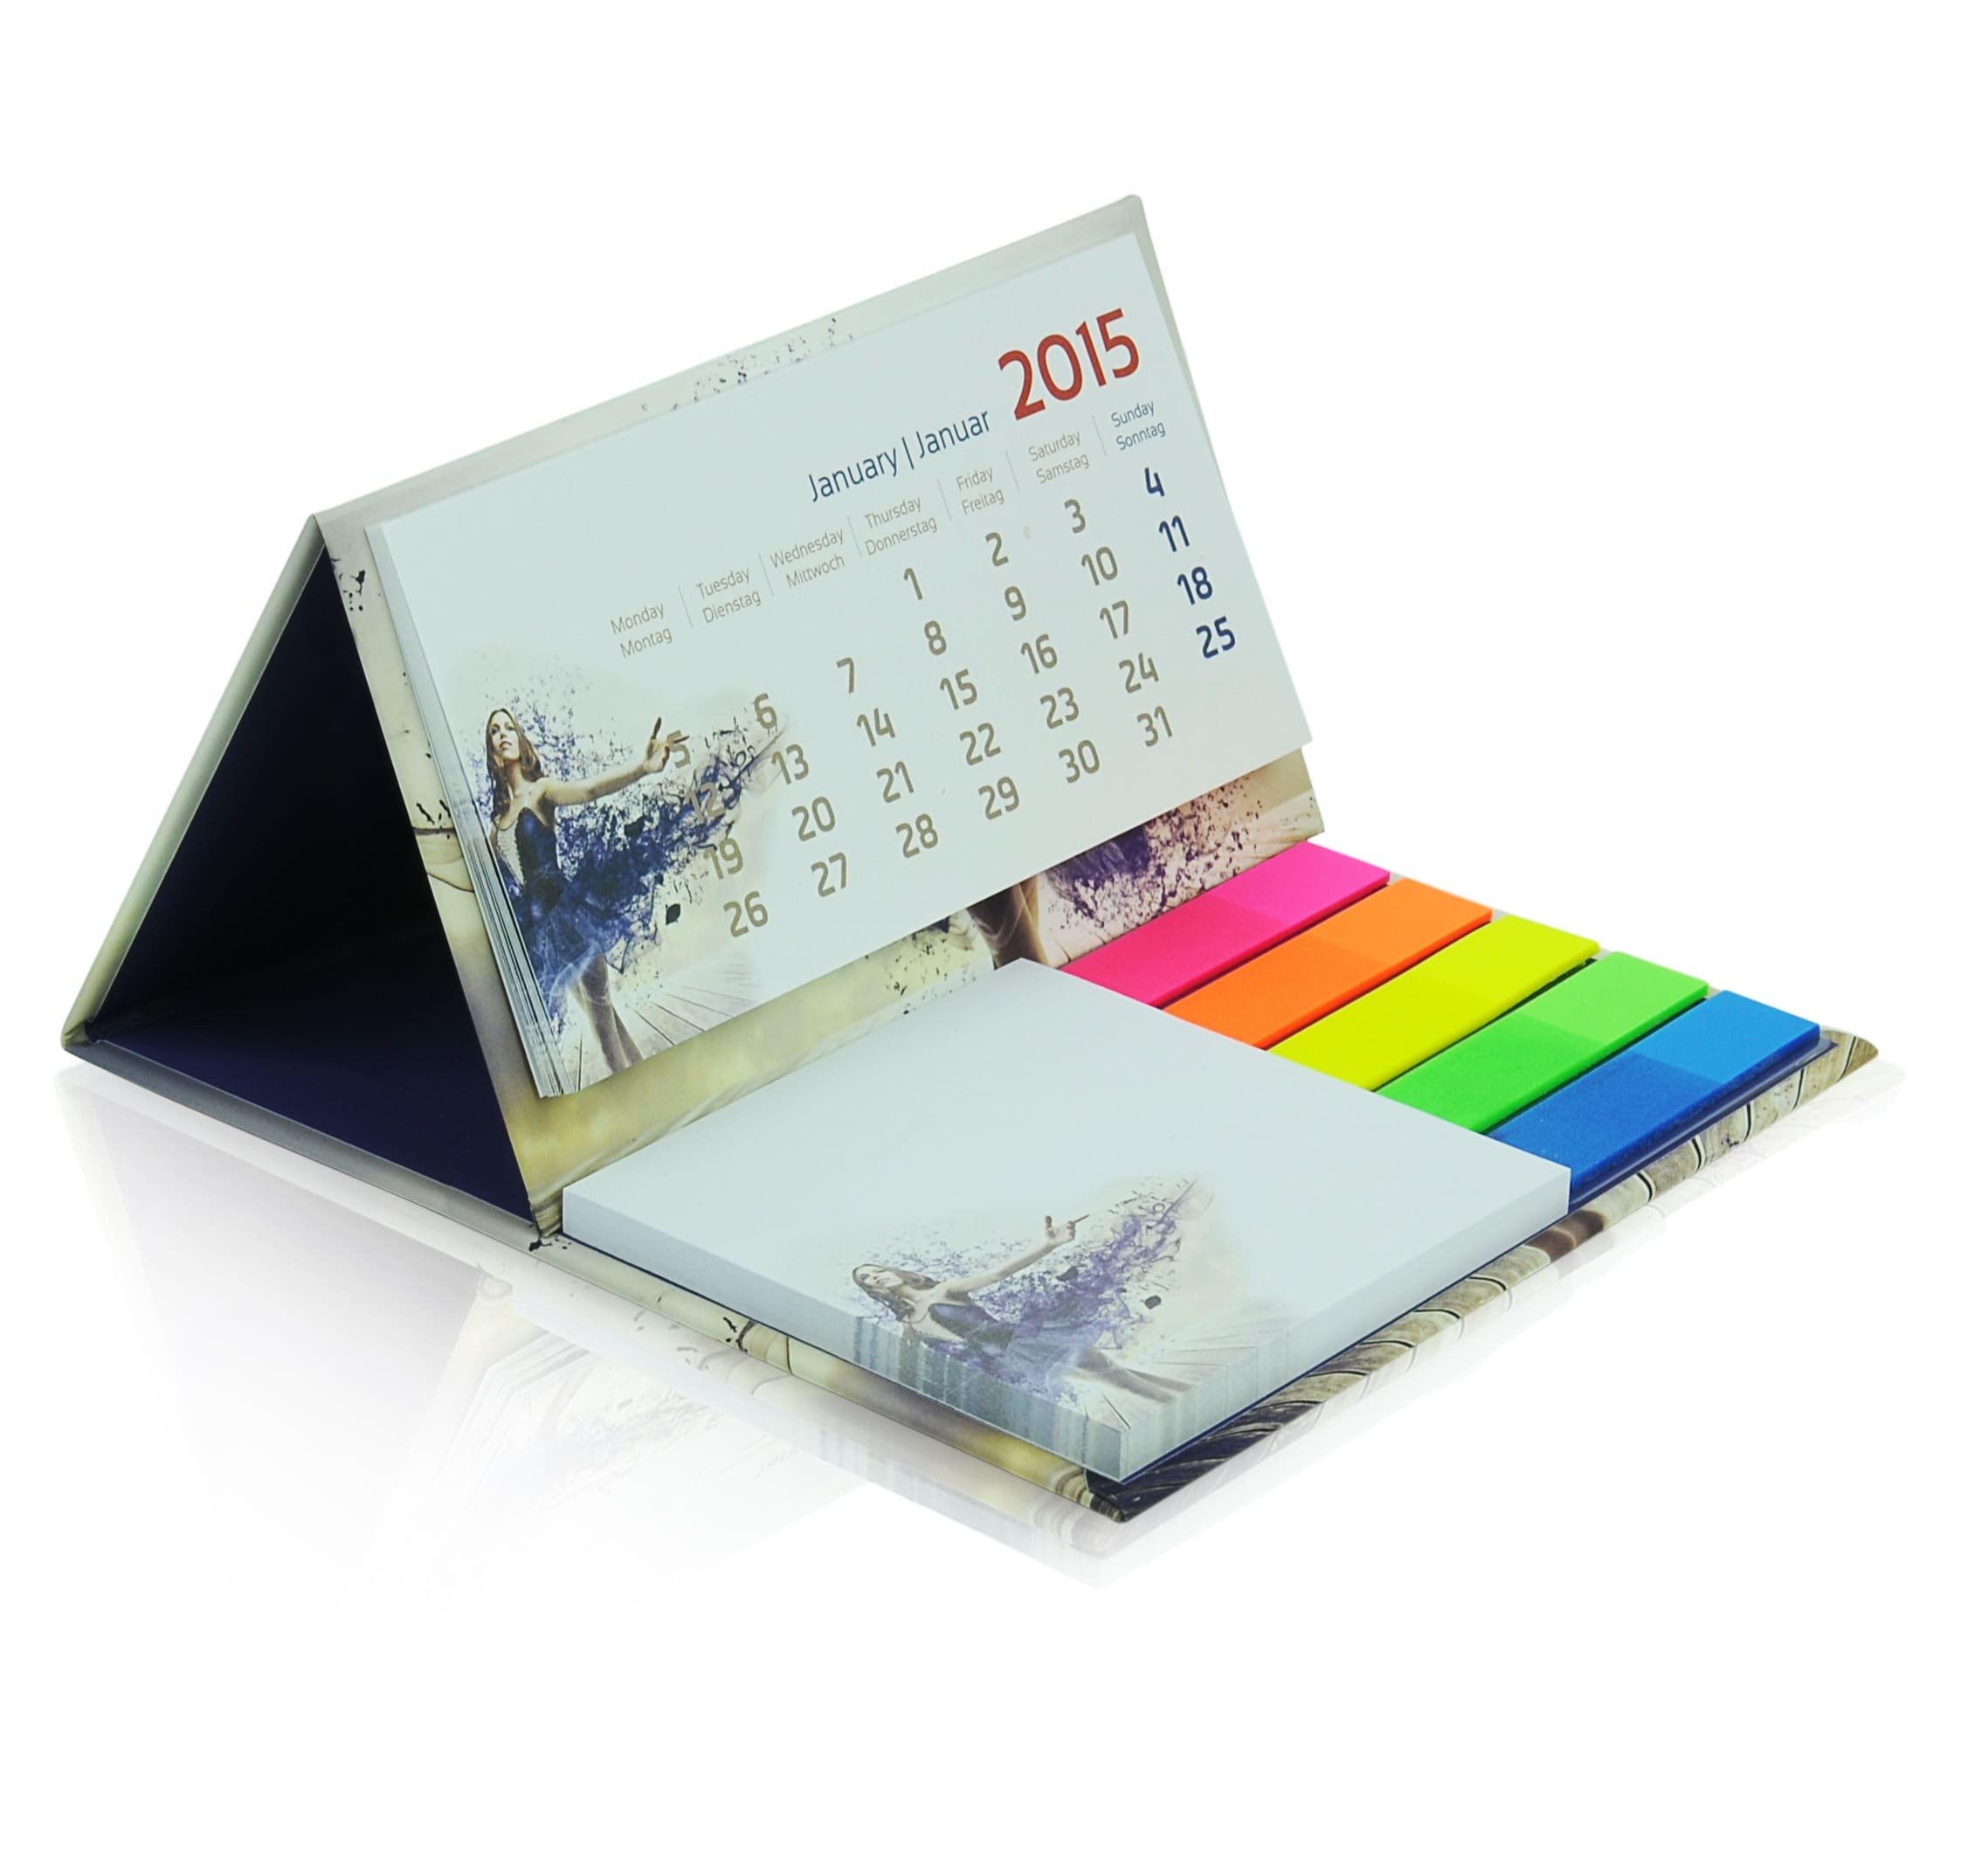 Full colour custom desk calendar 2019 with notepads and index markers, www.ontimeprint.co.uk